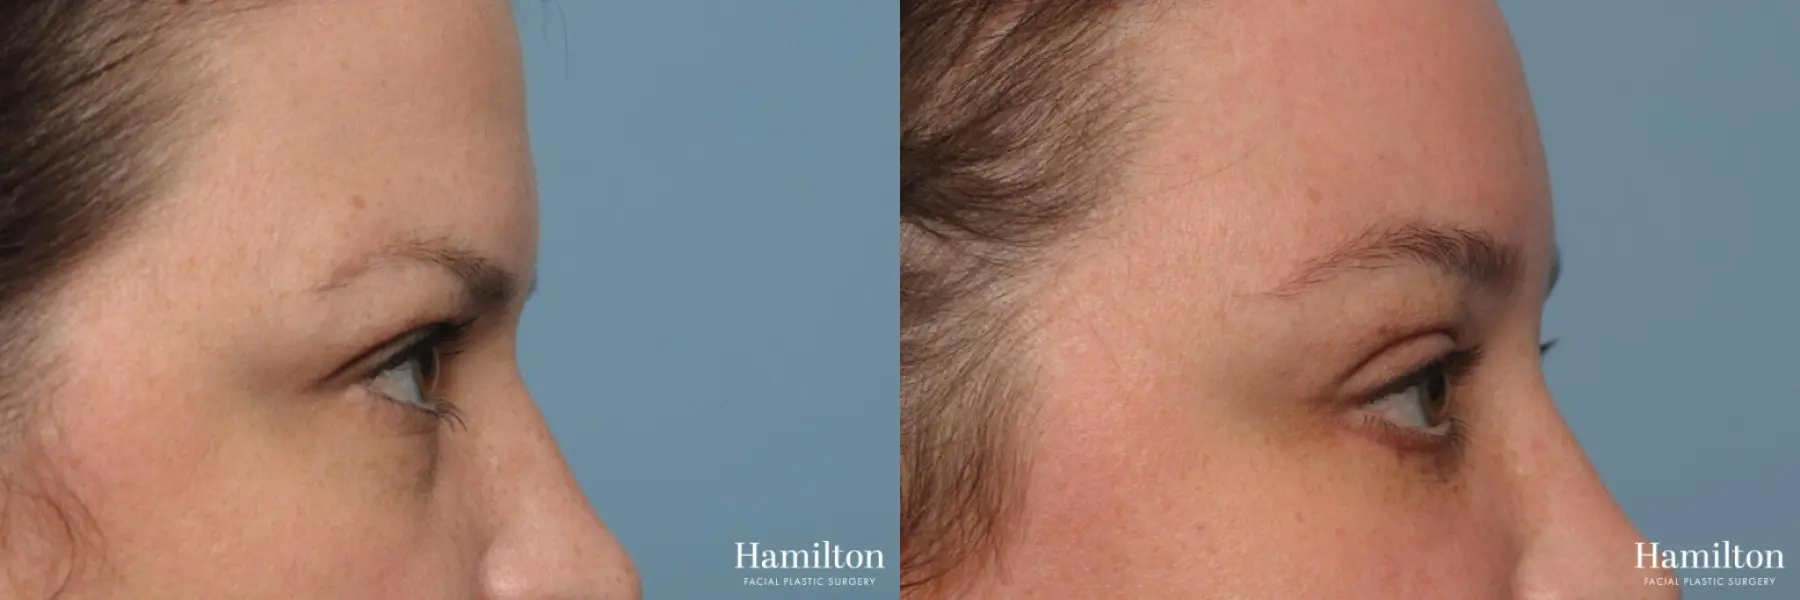 Brow Lift: Patient 1 - Before and After 5